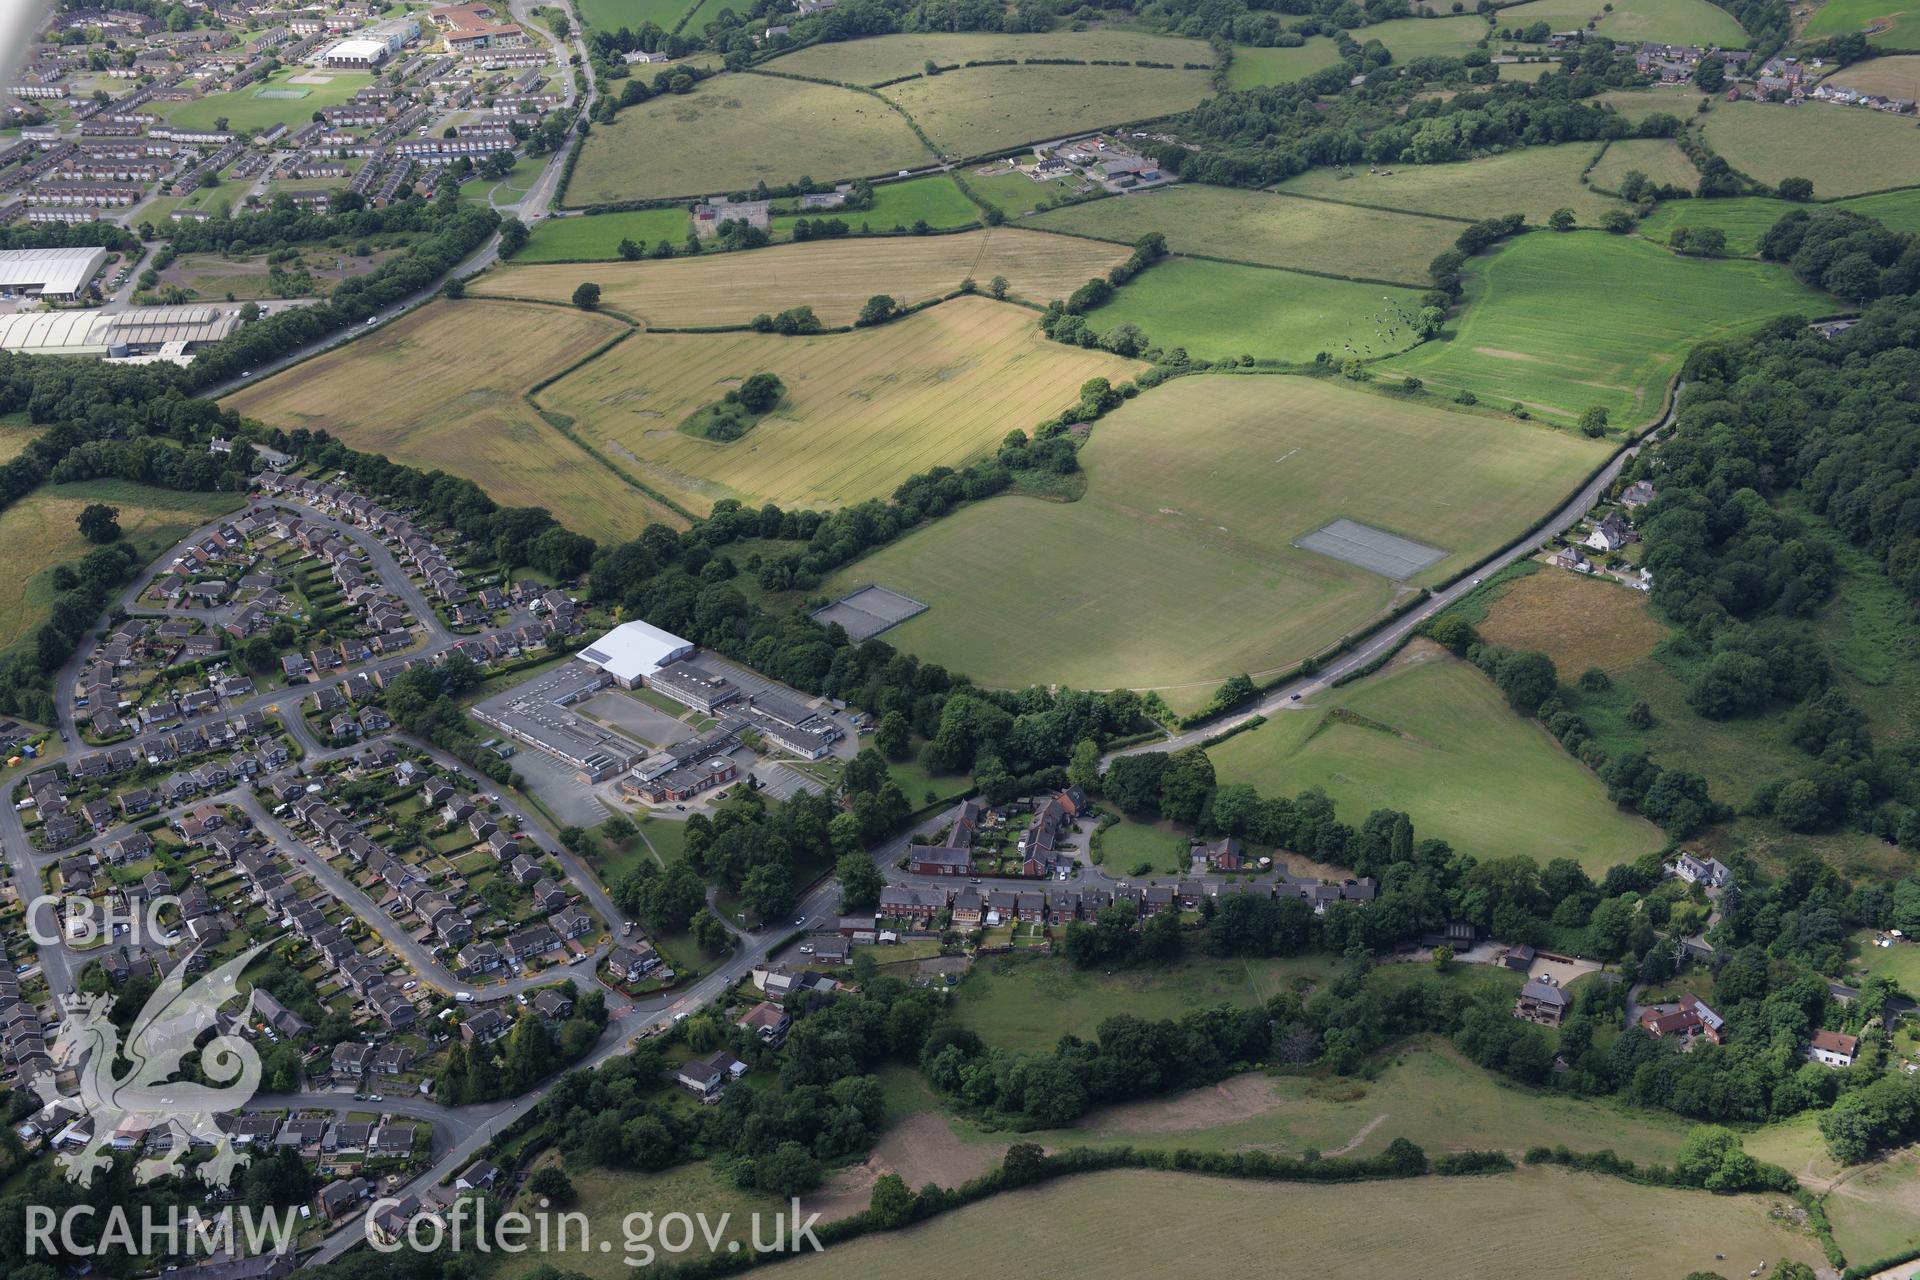 Rhiwabon town and the Tatham Bridge section of Offa's Dyke. Oblique aerial photograph taken during the Royal Commission's programme of archaeological aerial reconnaissance by Toby Driver on 30th July 2015.